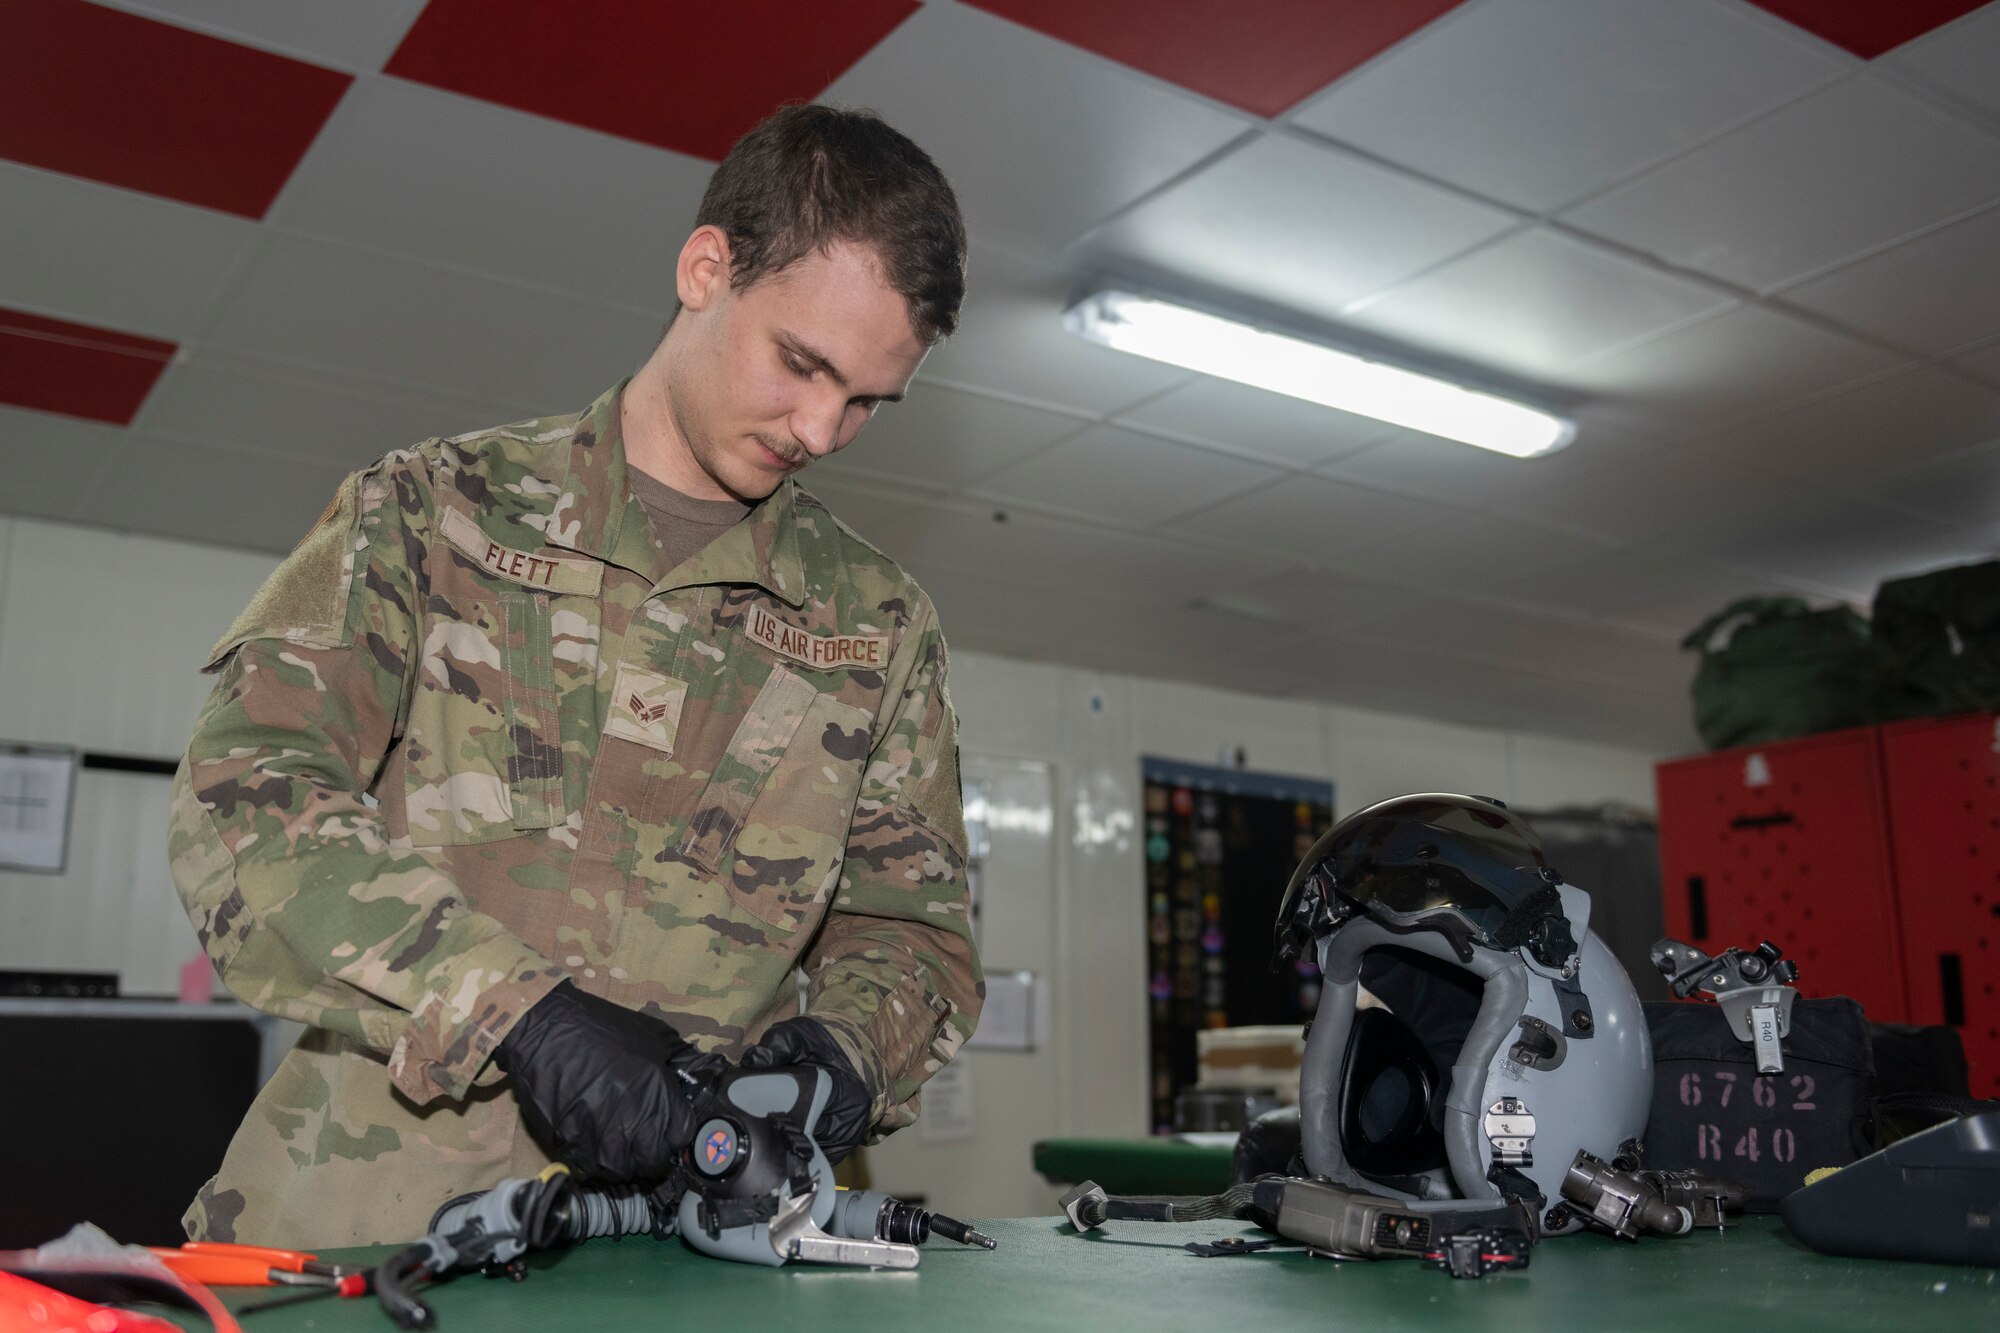 U.S. Air Force Senior Airman Jesse Flett, 494th Expeditionary Fighter Squadron aircrew flight equipment technician, inspects a helmet for damages Sept. 7, 2021, at an undisclosed location somewhere in Southwest Asia. Aircrew flight equipment technicians ensure pilots are equipped with the specific gear needed to perform their missions. (U.S. Air Force photo by Senior Airman Cameron Otte)